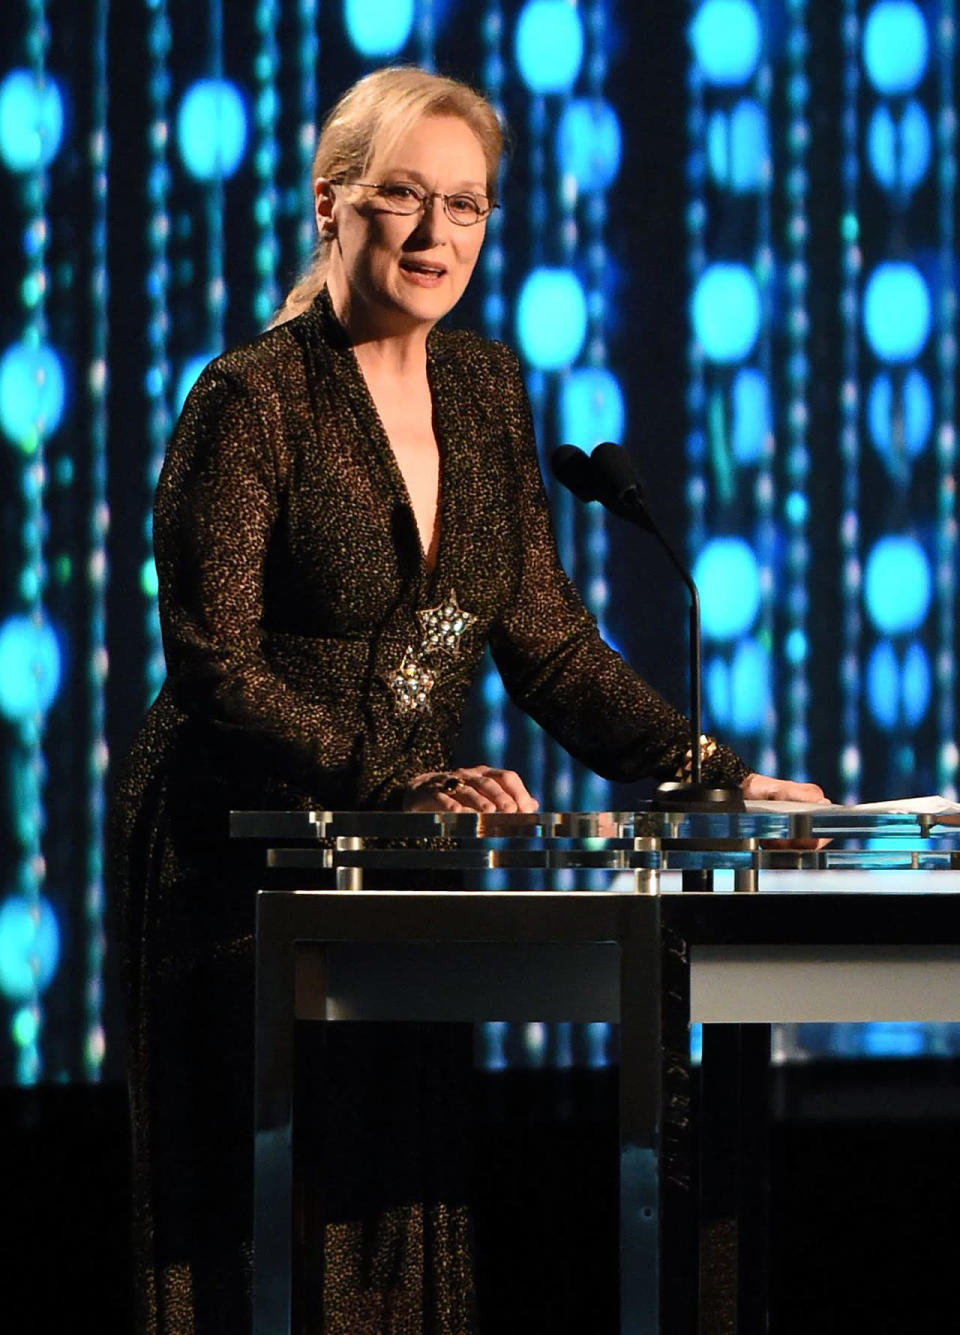 Meryl Streep appears to have given the red carpet a miss, but showed how incredible she looks during the gala’s ceremony. The 66-year-old sparkled in a floor-length black and gold dress. [Photo: Rex]